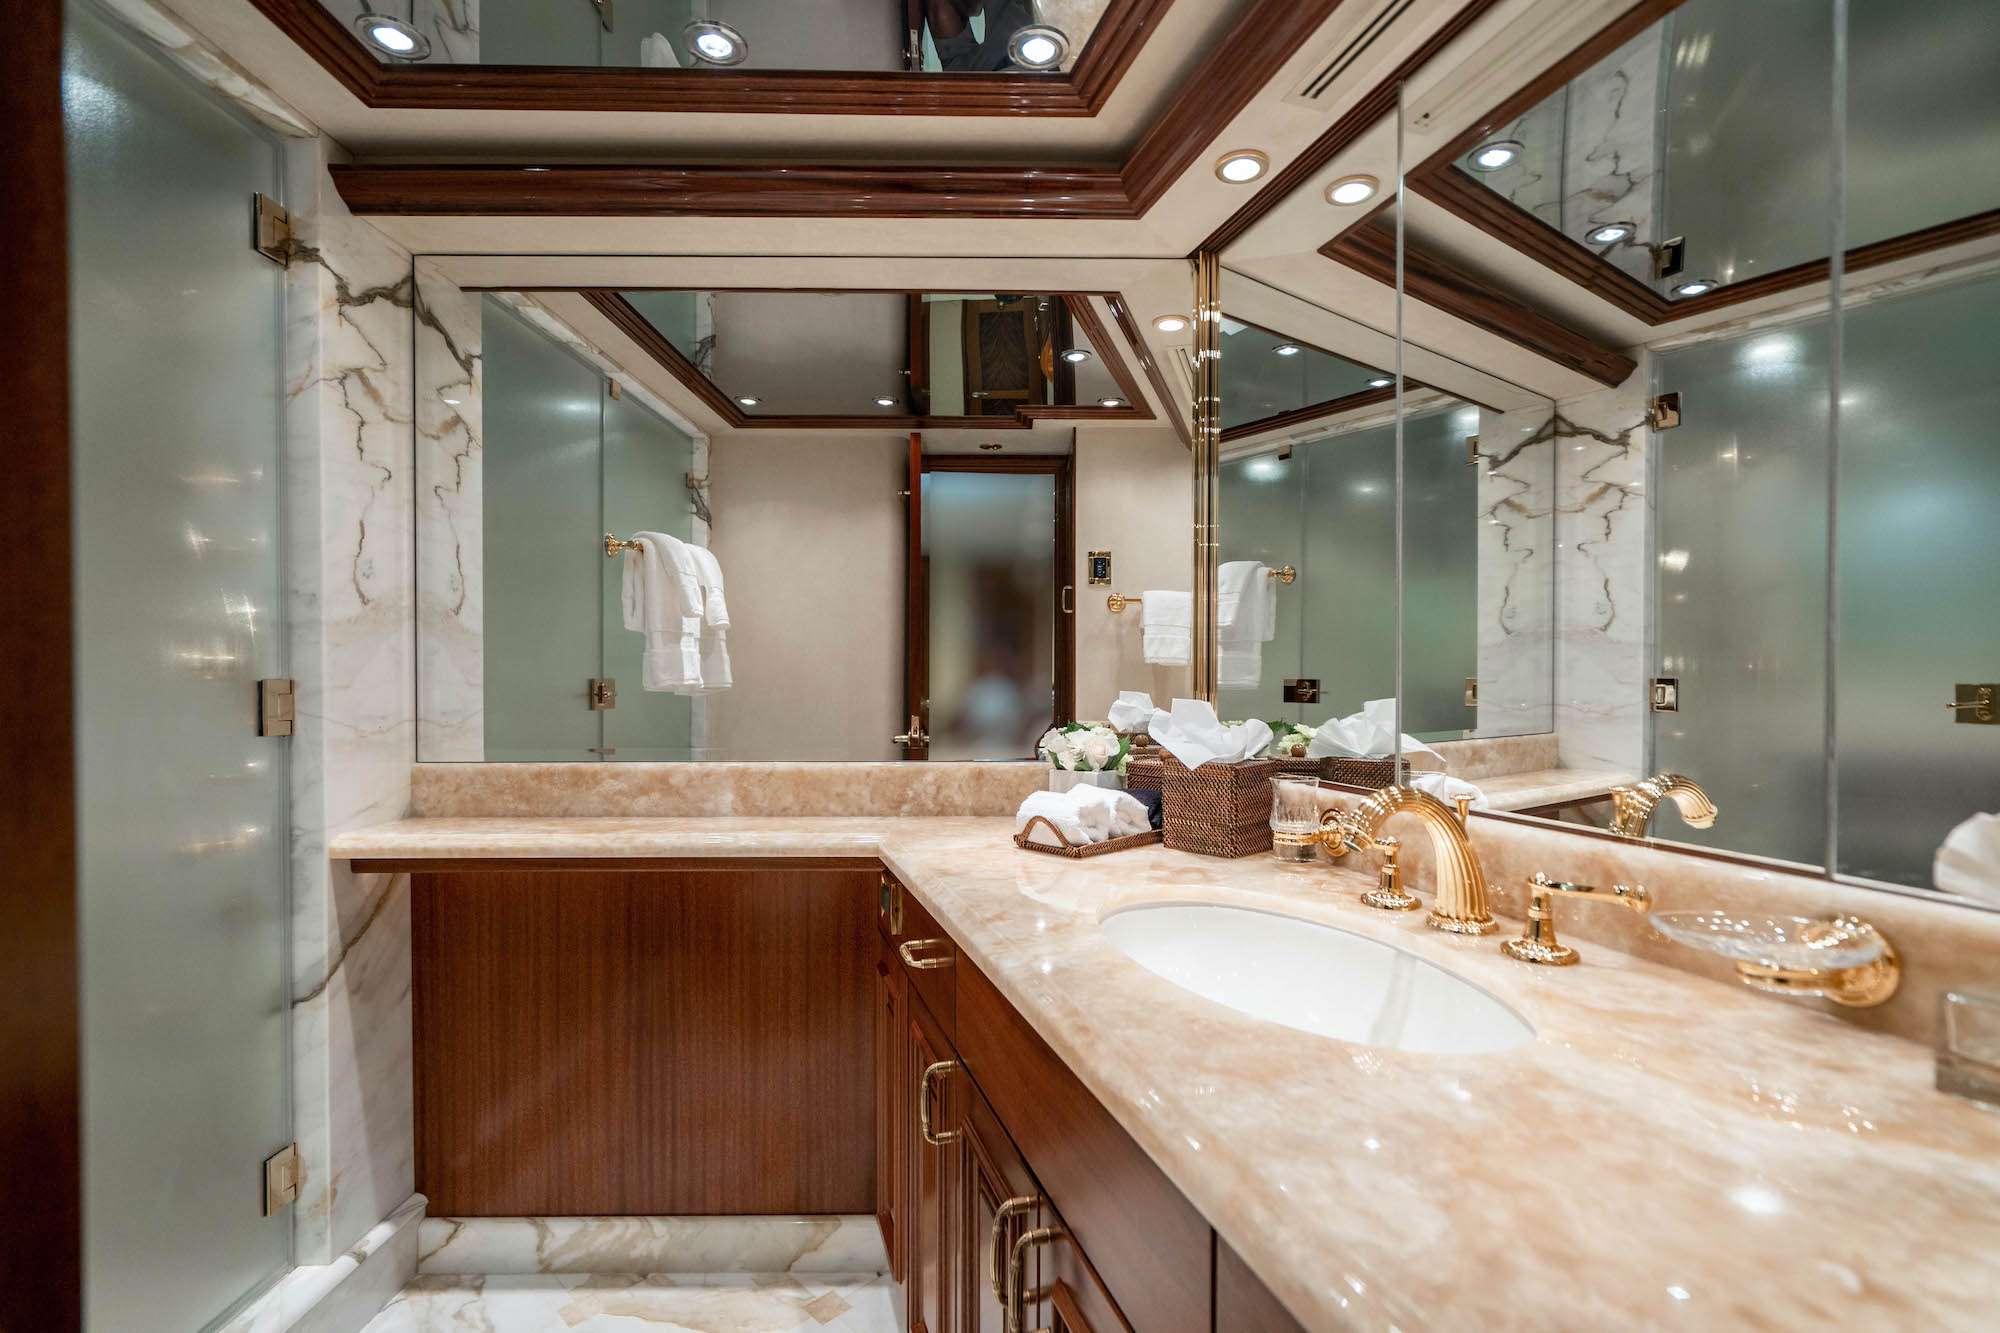 NOW OR NEVER Yacht Charter - Master Bathroom